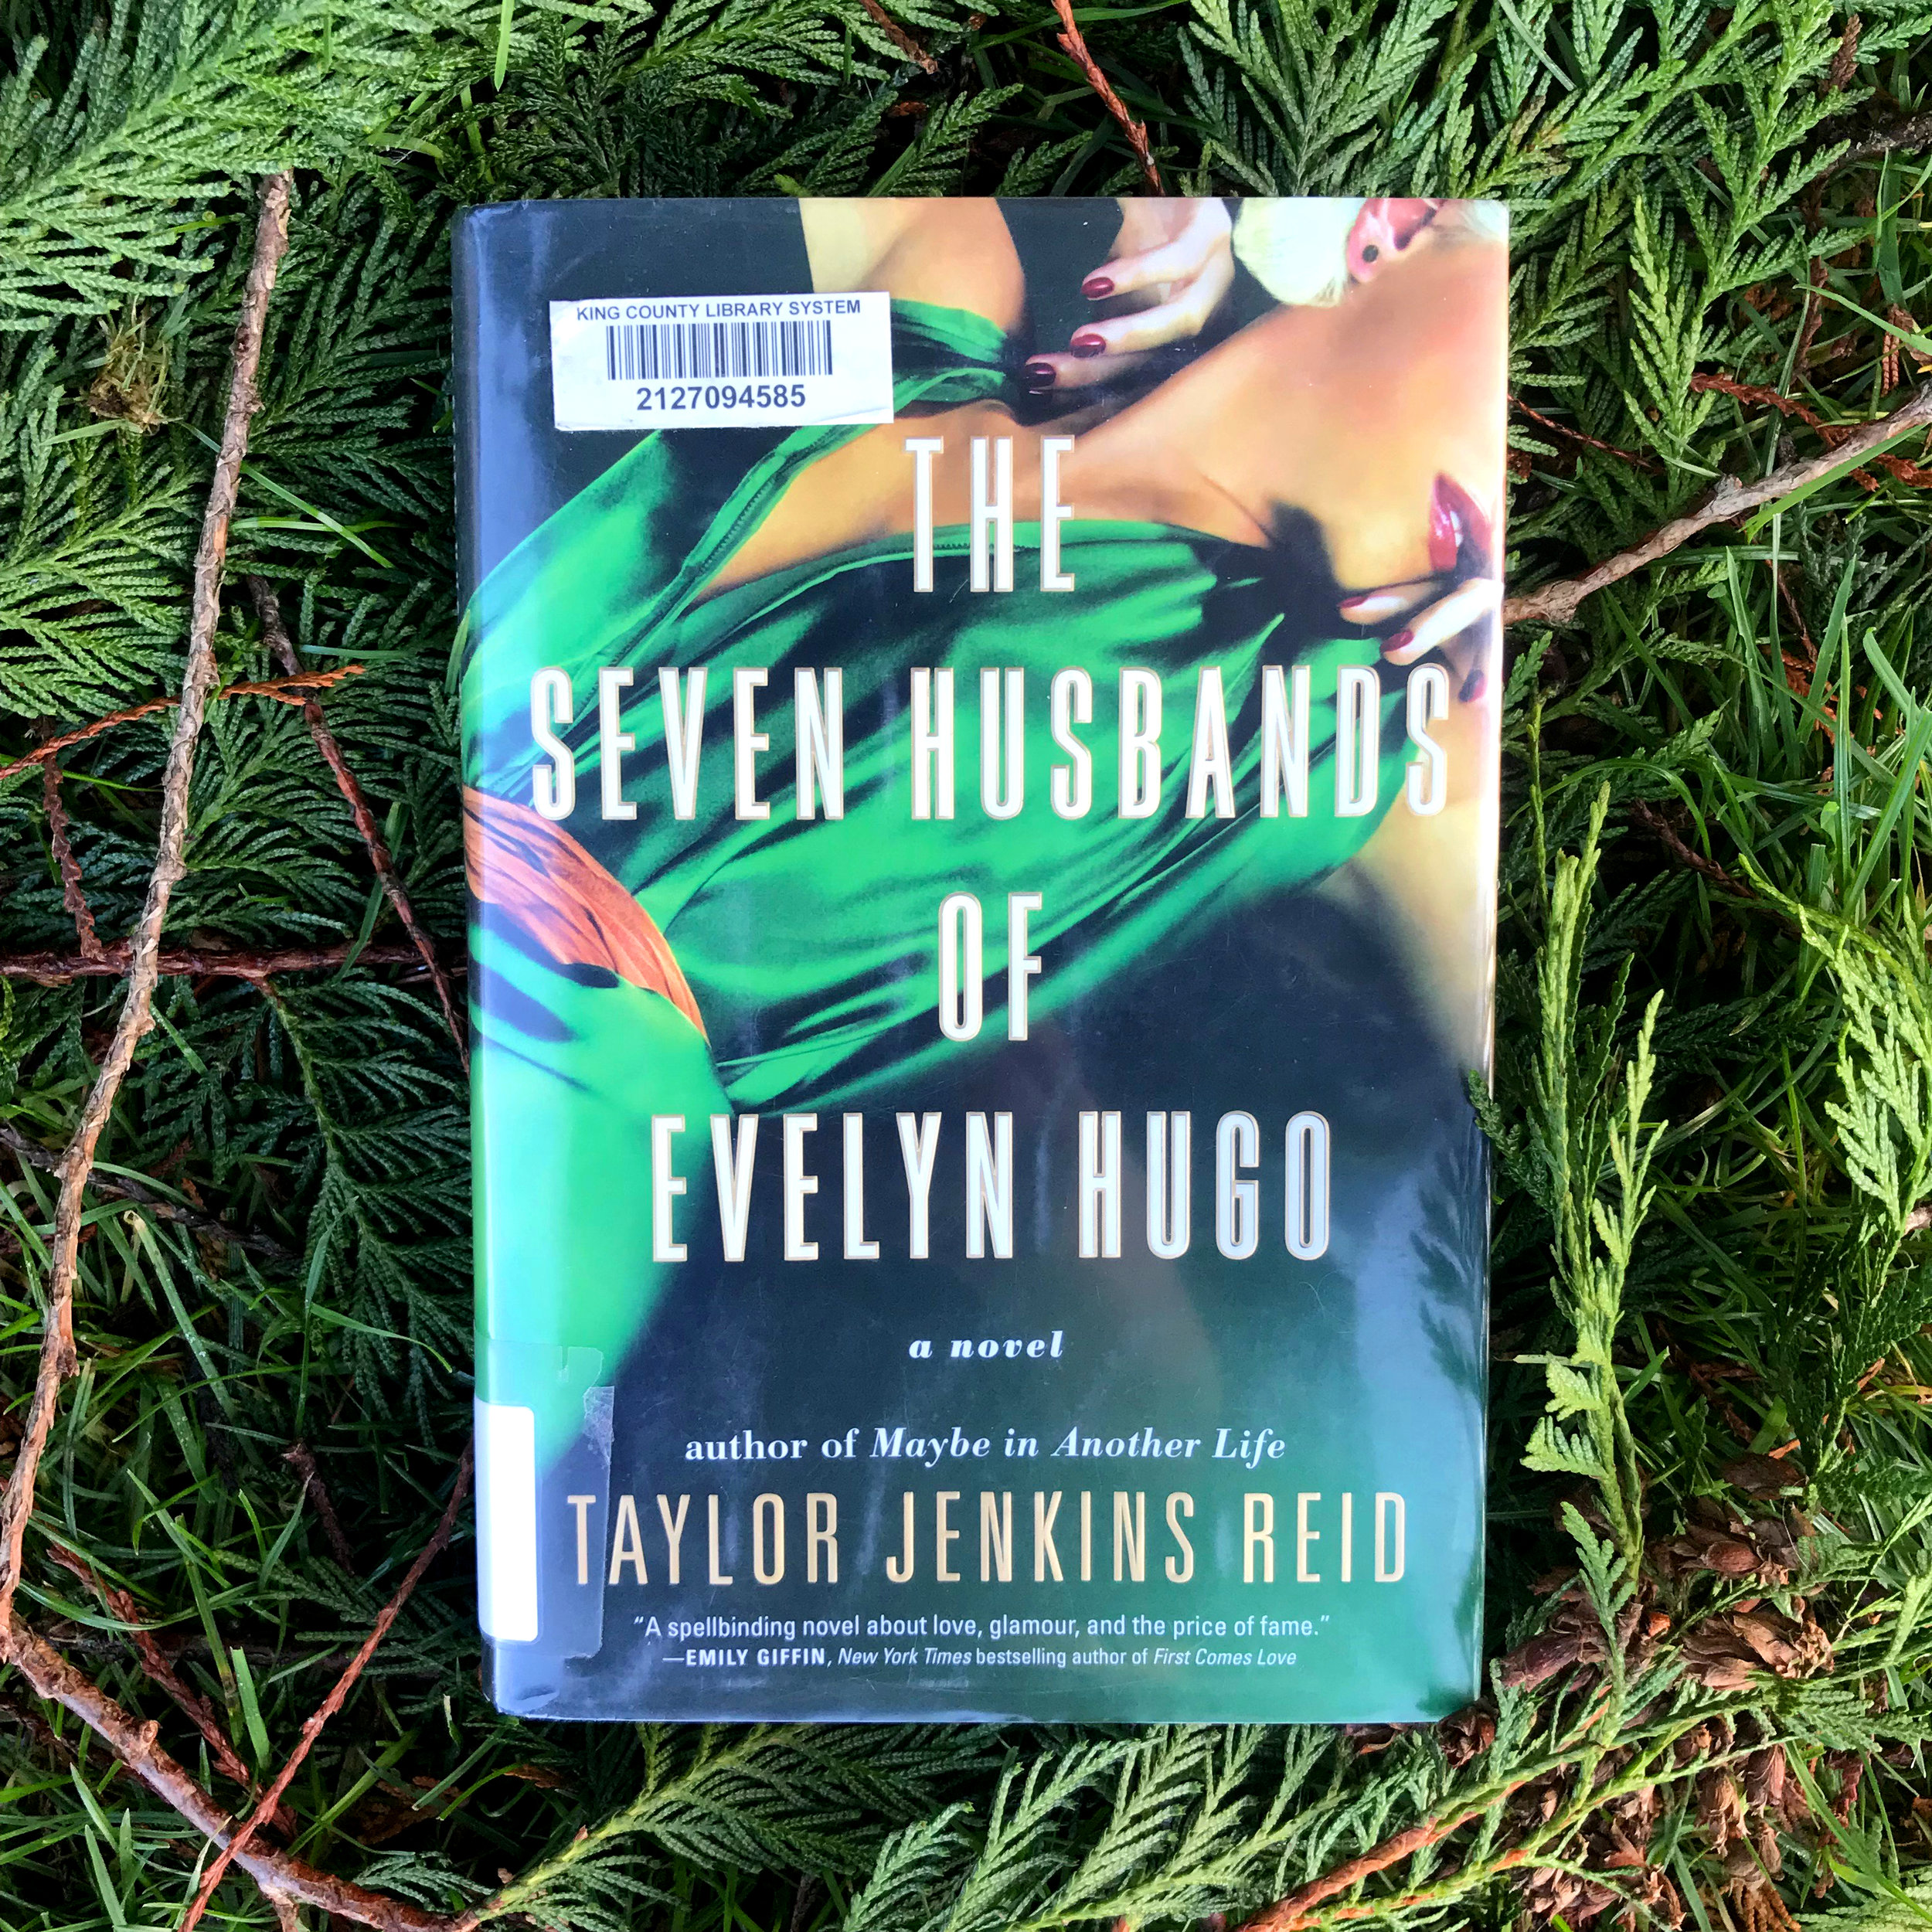 Book Review: The Seven Husbands of Evelyn Hugo by Taylor Jenkins Reid —  She's Full of Lit